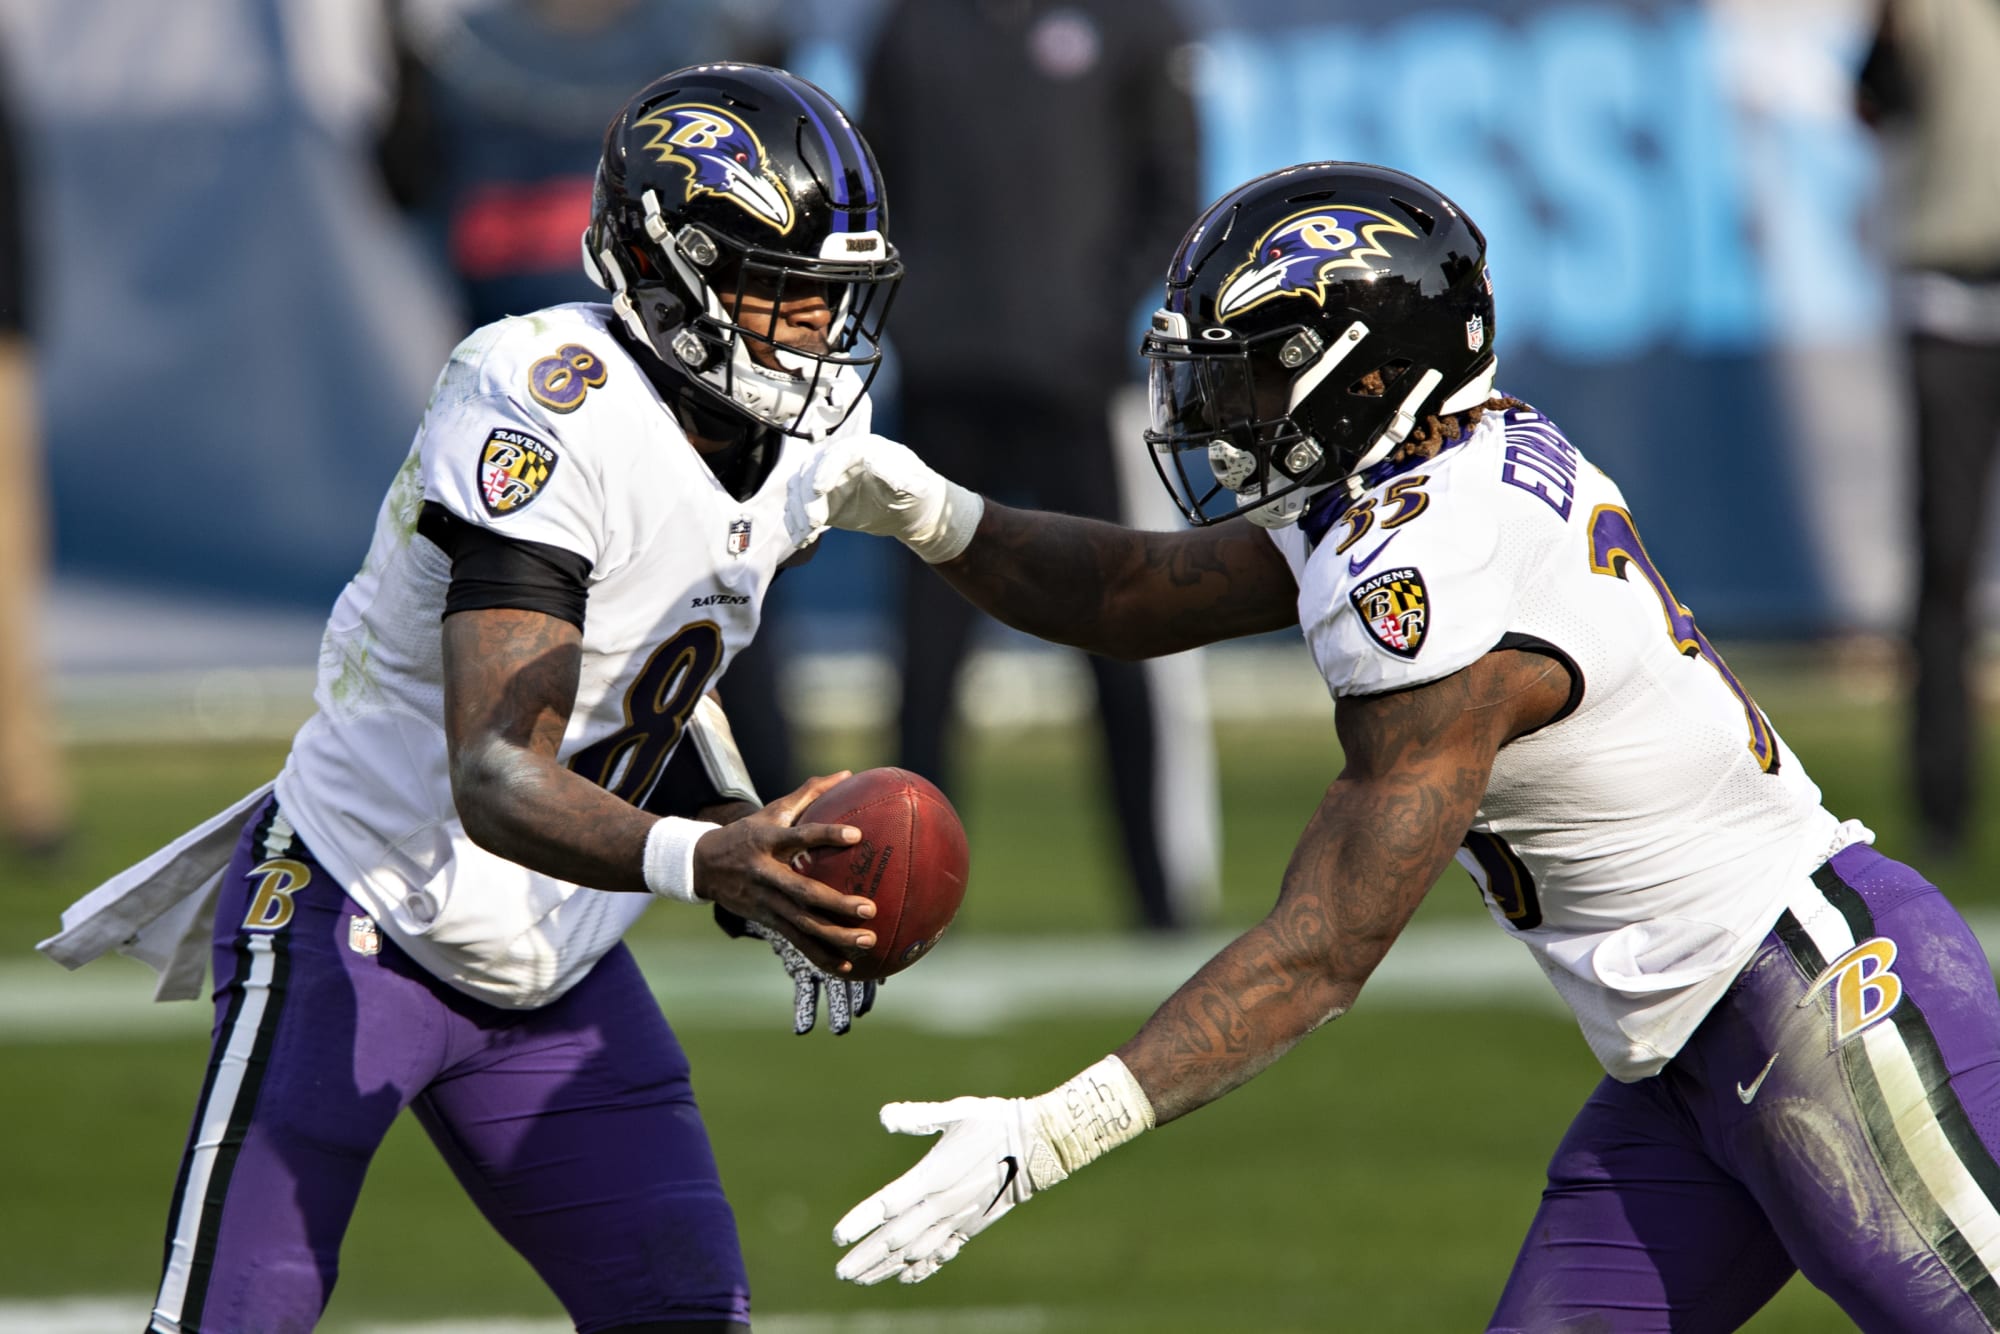 Baltimore Ravens are better suited than Buffalo Bills for snowy weather